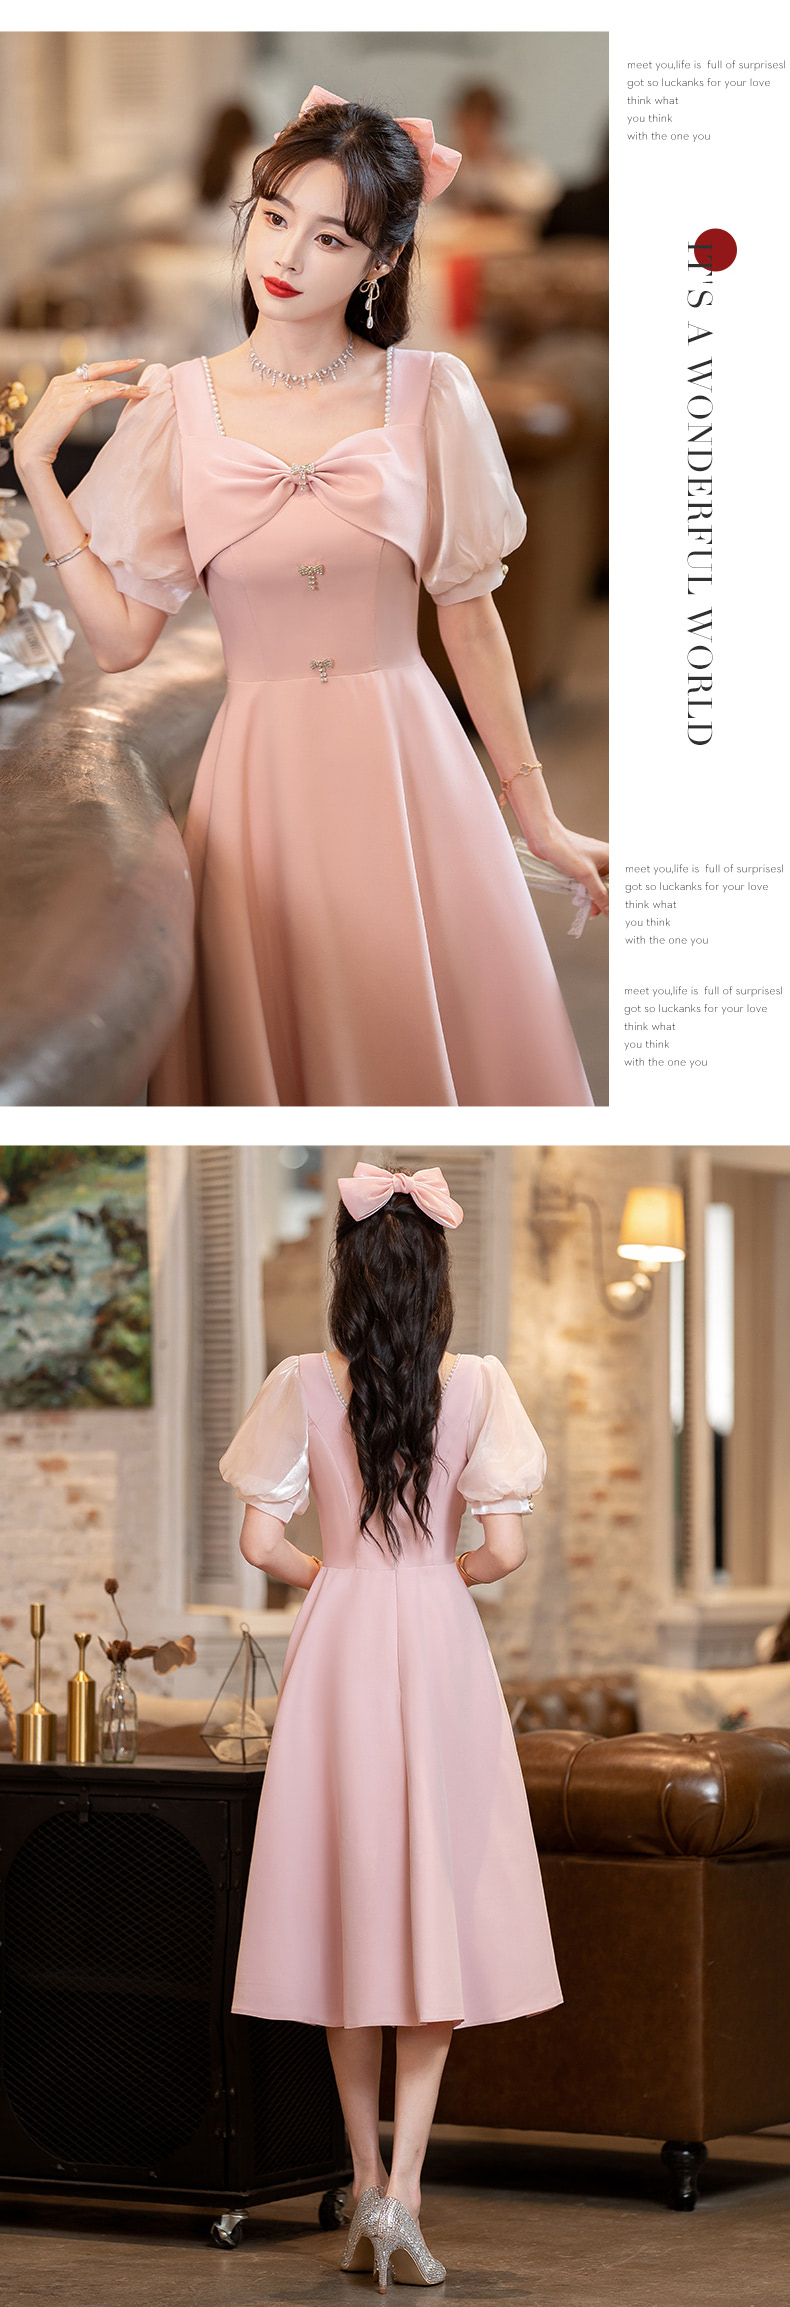 Modest-Pink-Simple-Evening-Prom-Midi-Dress-for-Party-Homecoming13.jpg